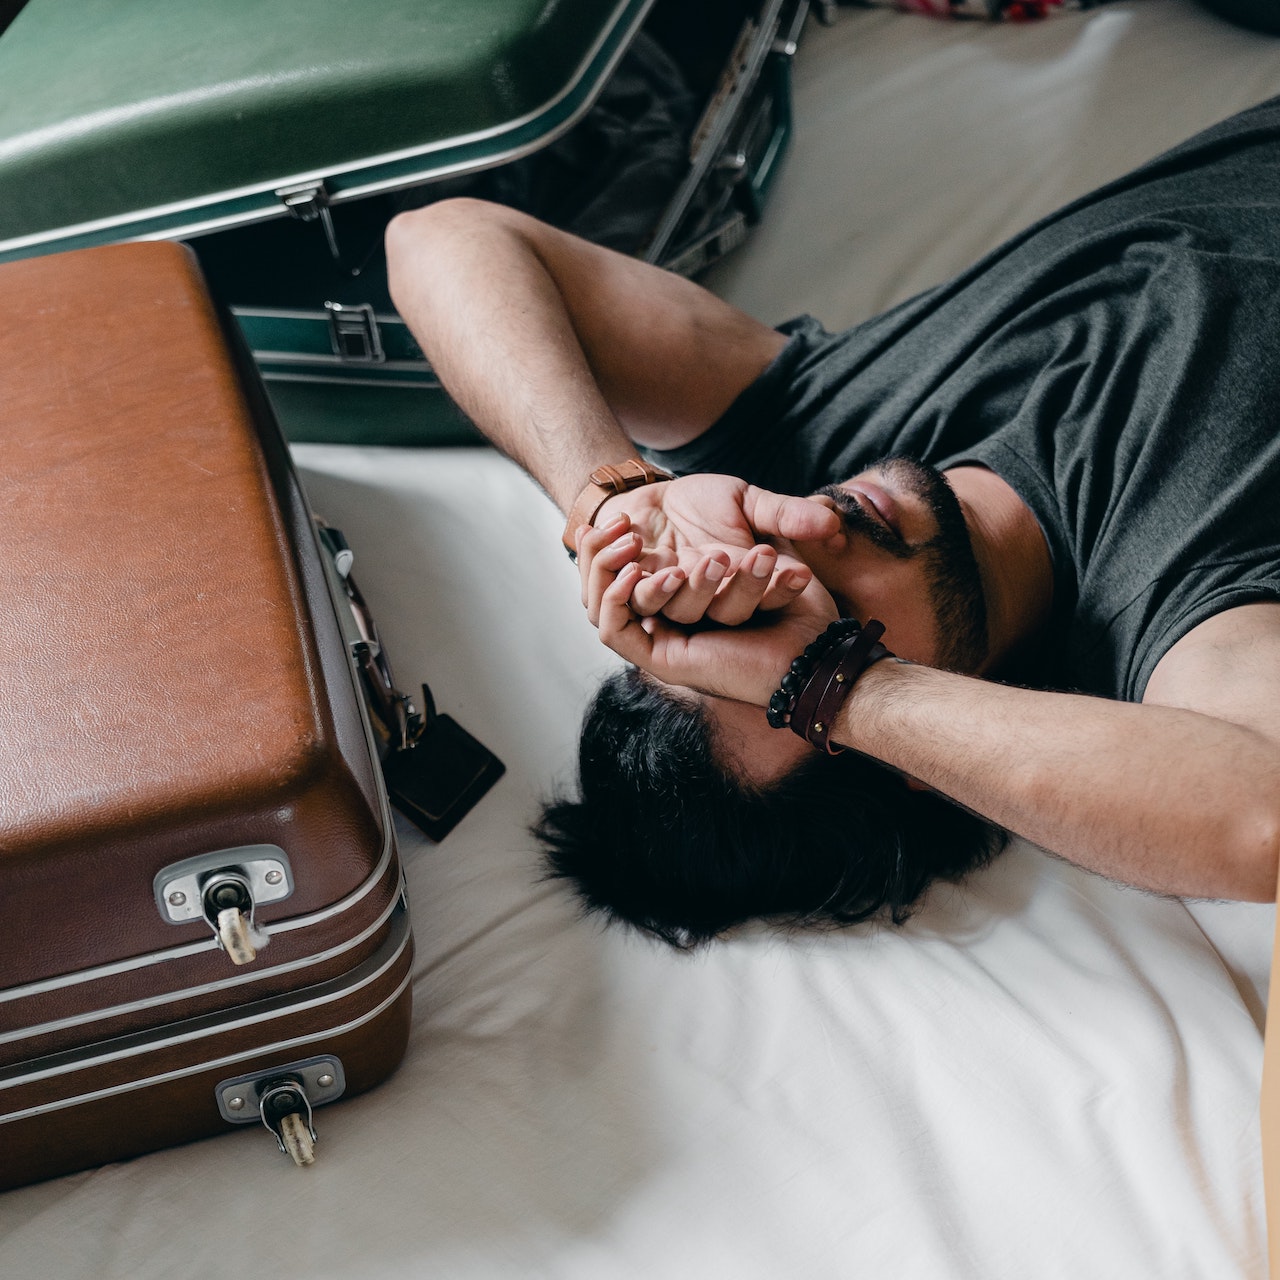 Man lying on bed with suitcases